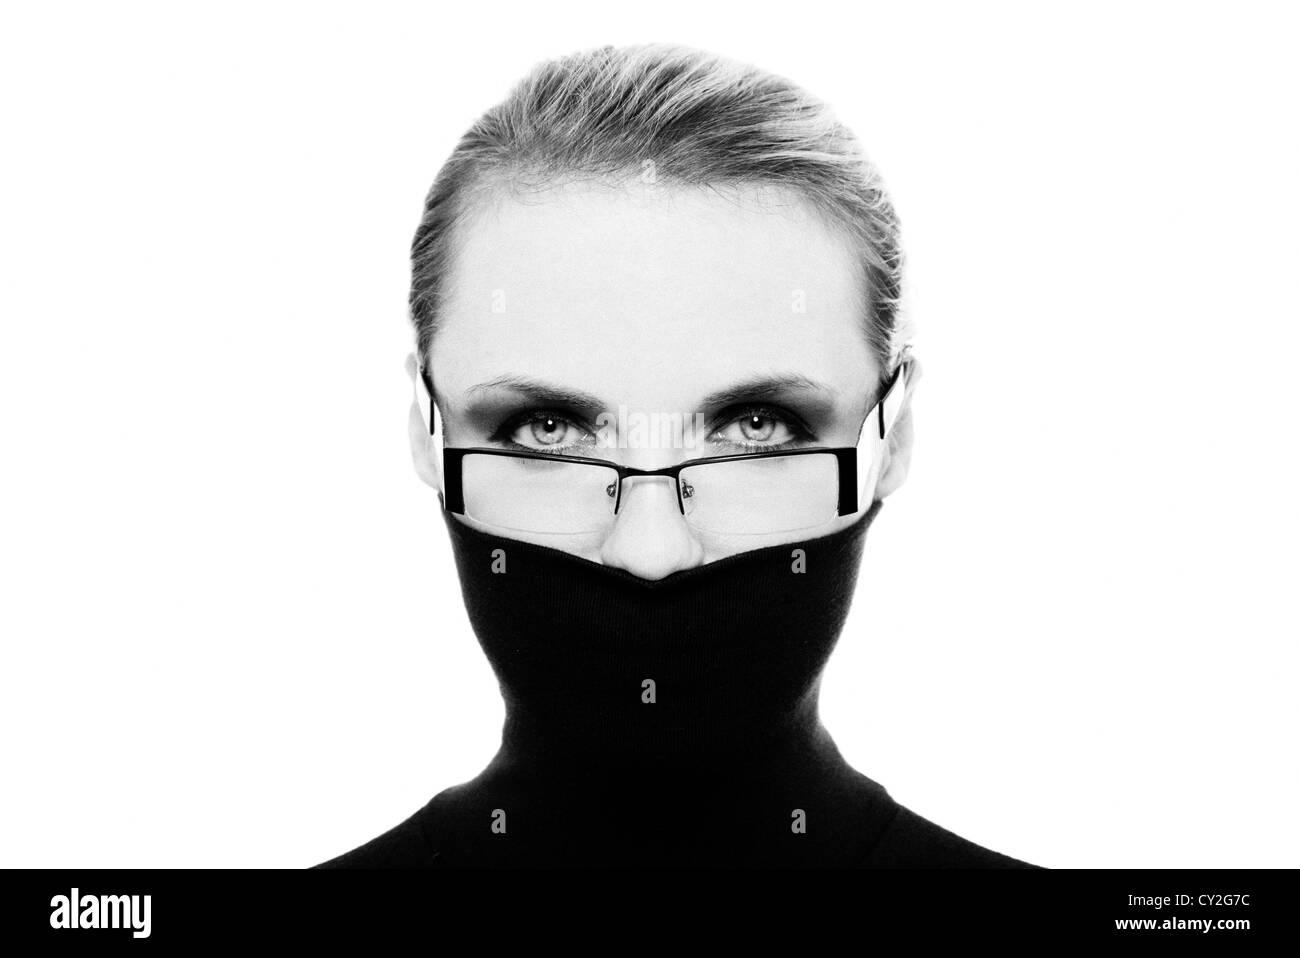 woman hiding her face with black polo neck jumper wearing glasses black & white Stock Photo